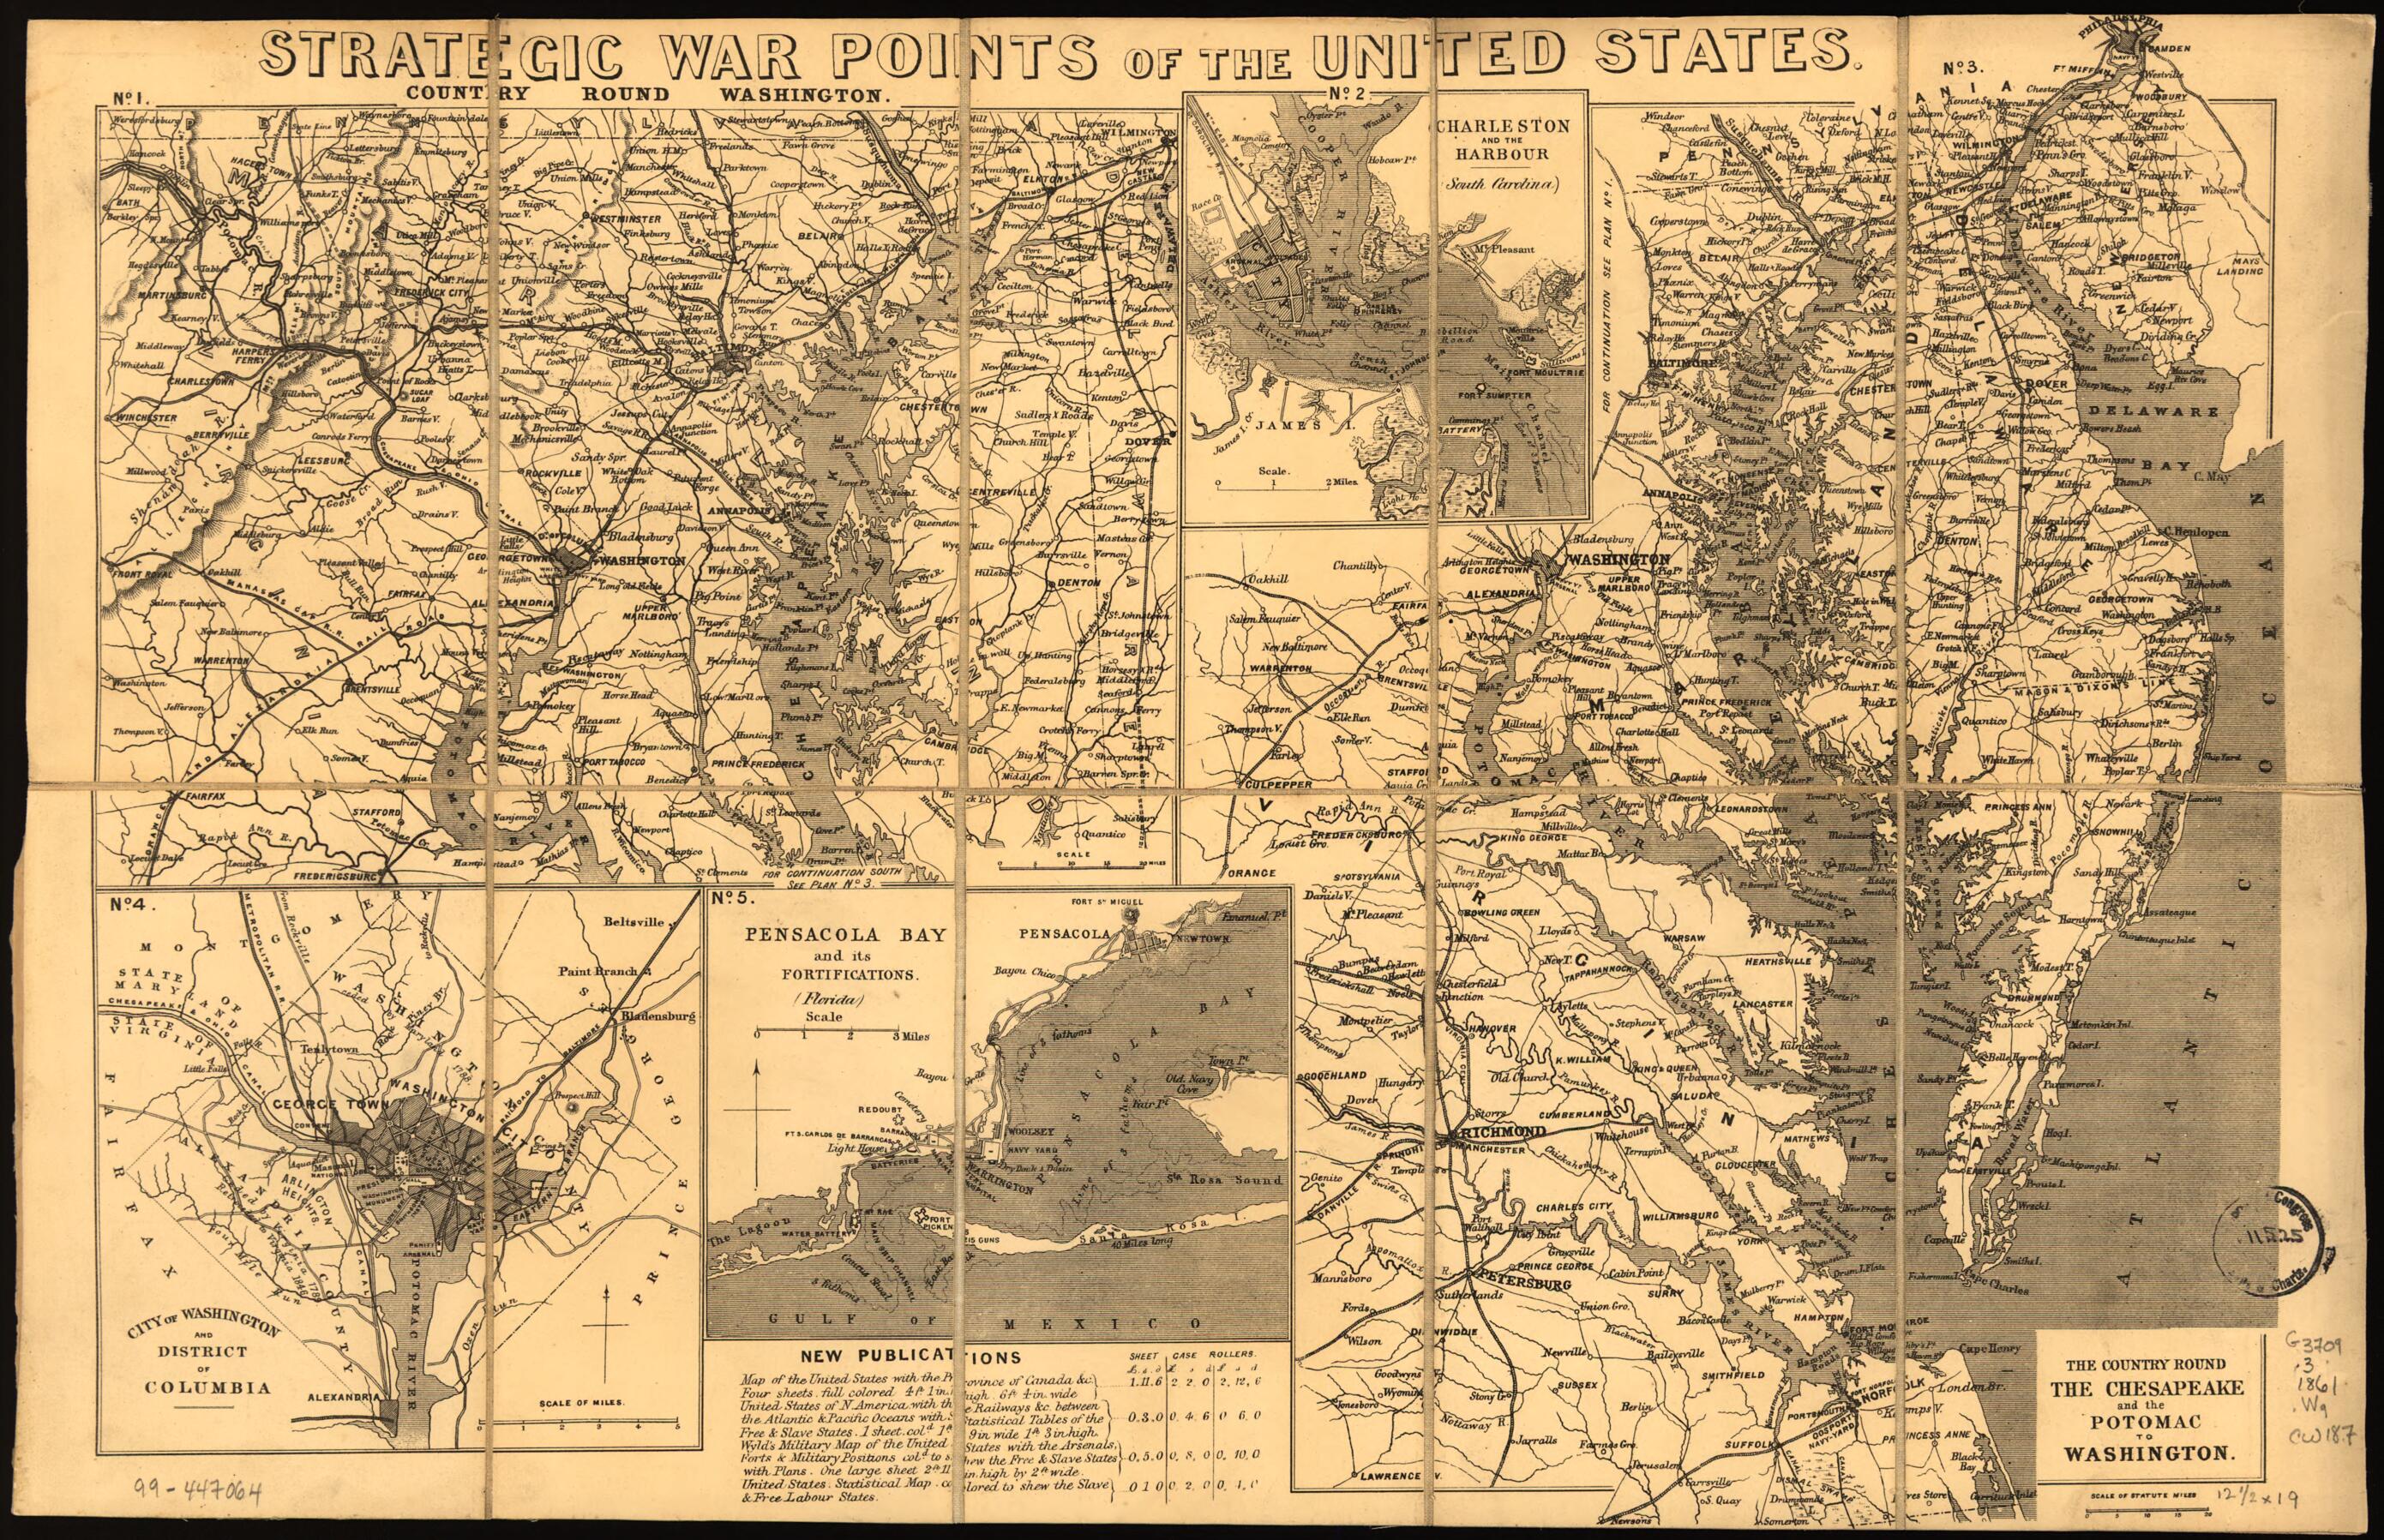 This old map of Strategic War Points of the United States from 1861 was created by James Wyld in 1861